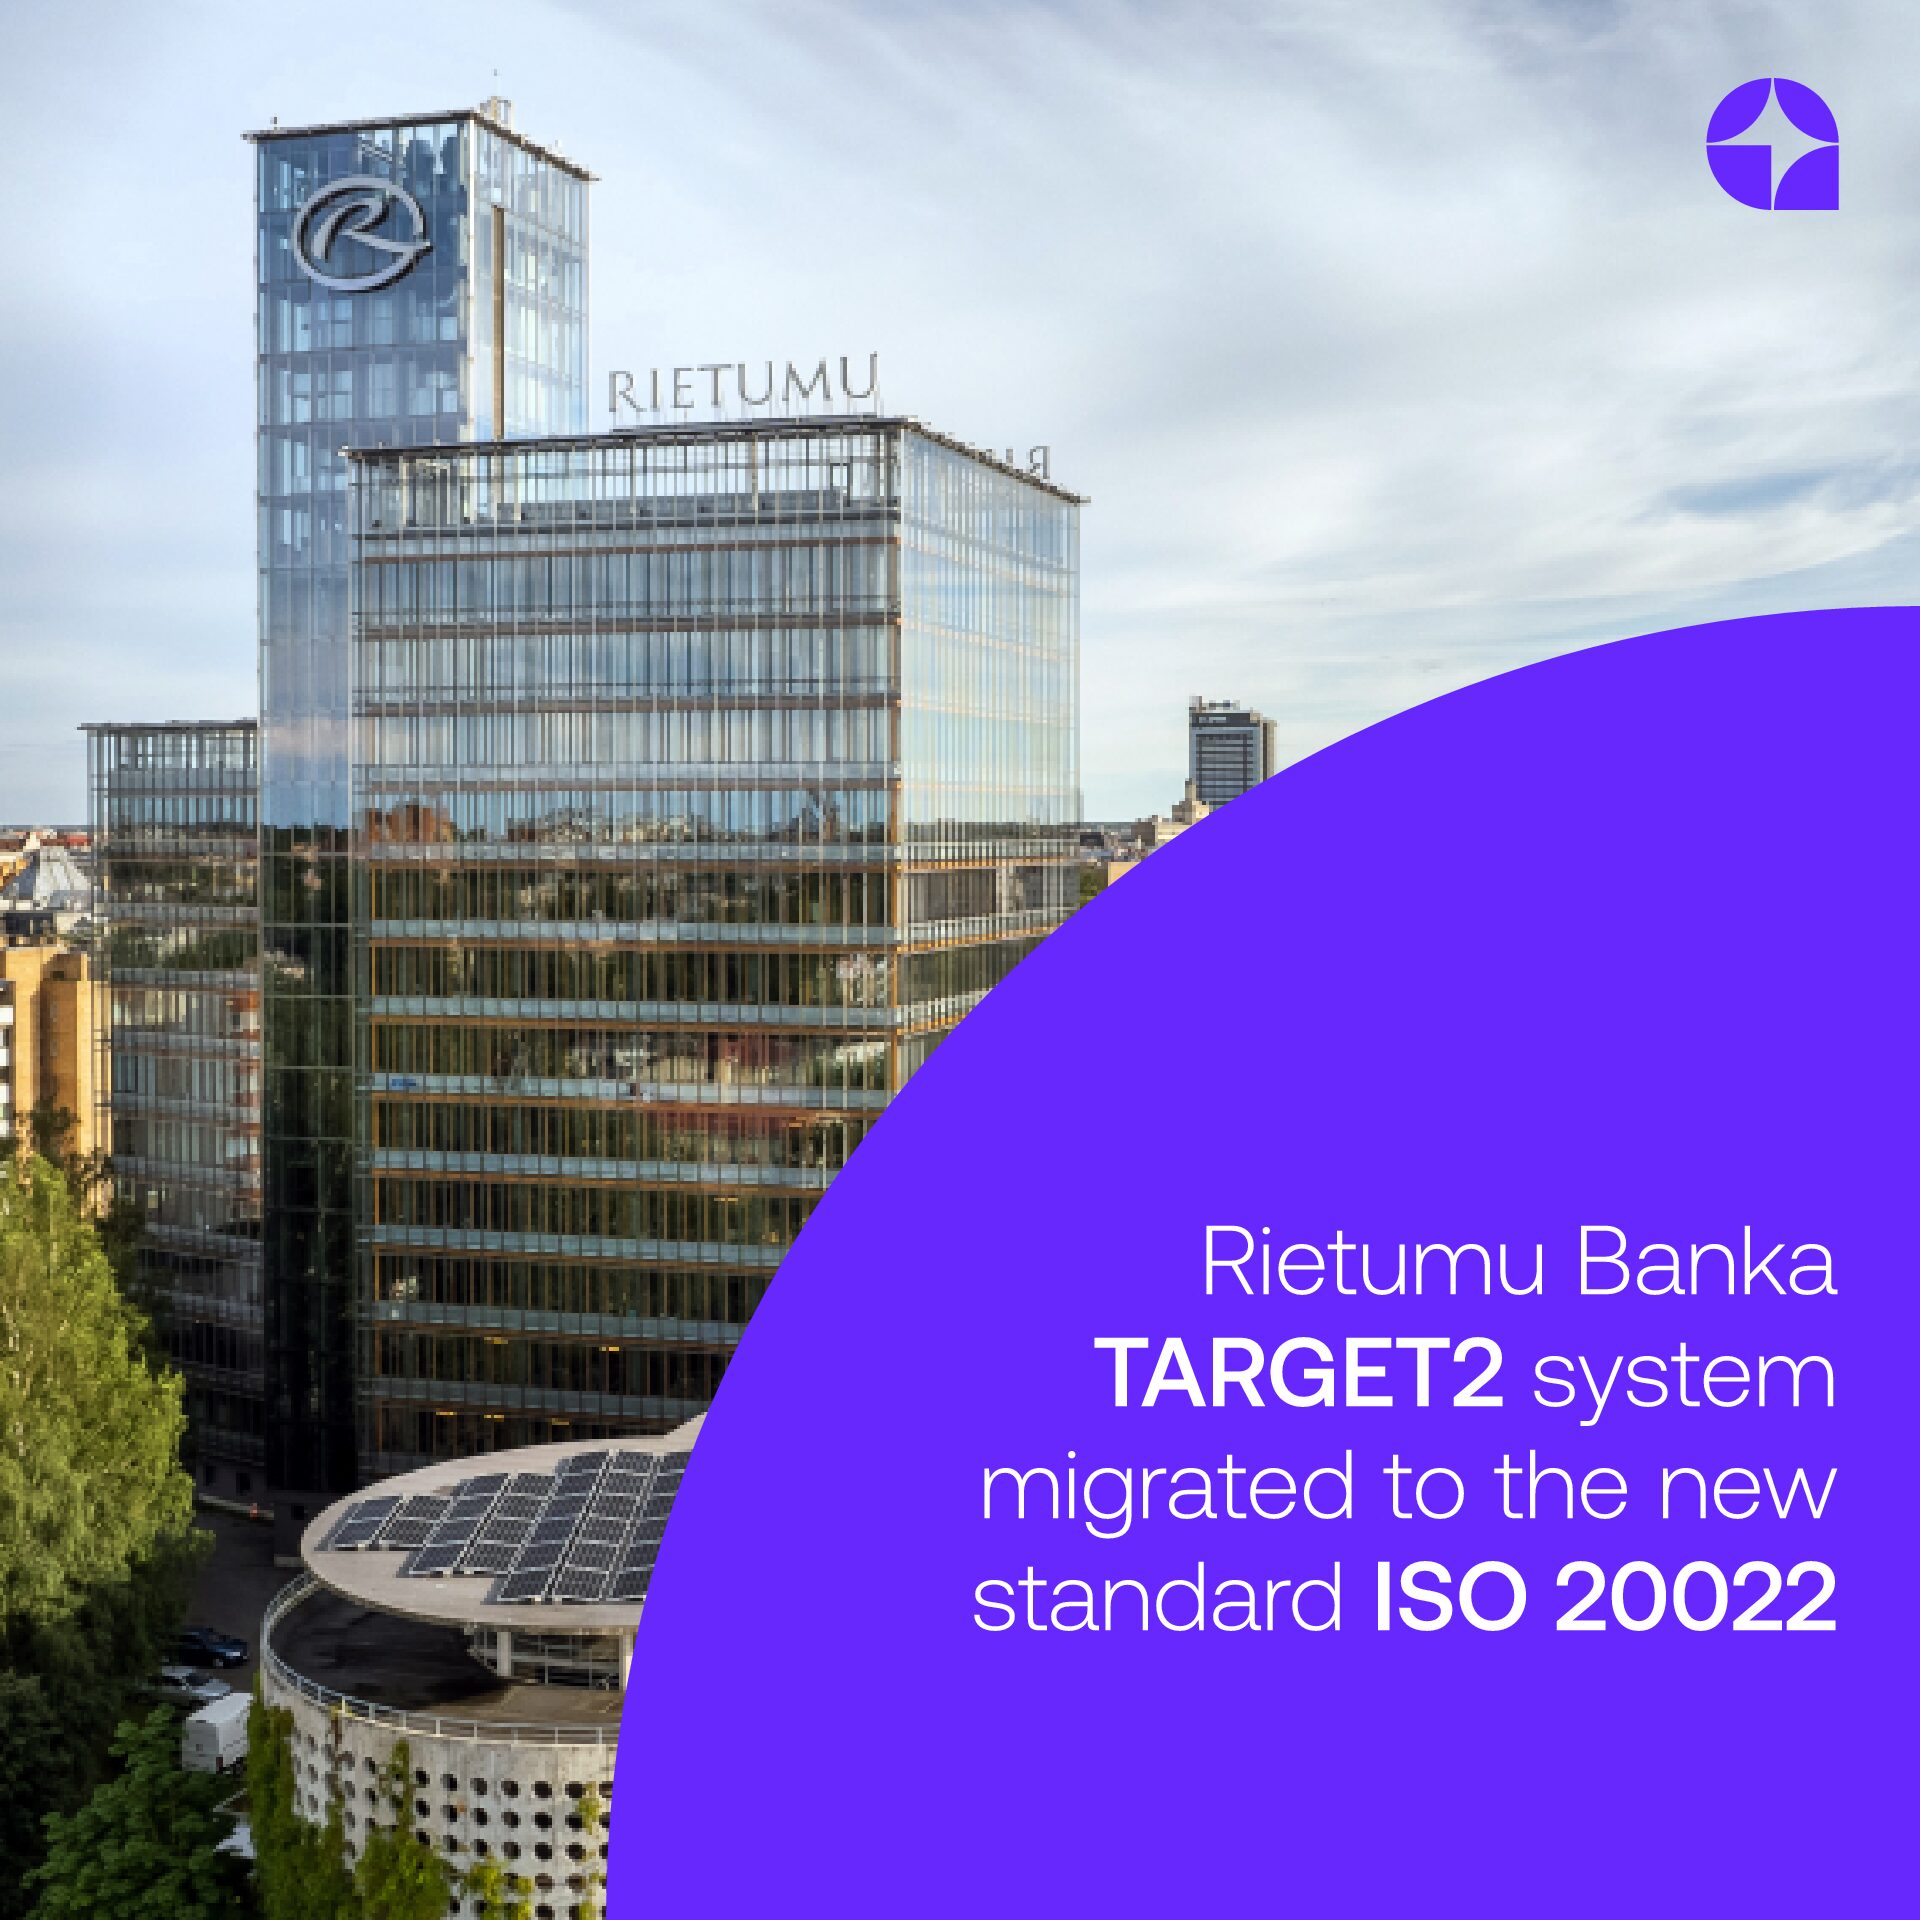 Successful migration of Rietumu Banka TARGET2 system to the new standard  – ISO 20022